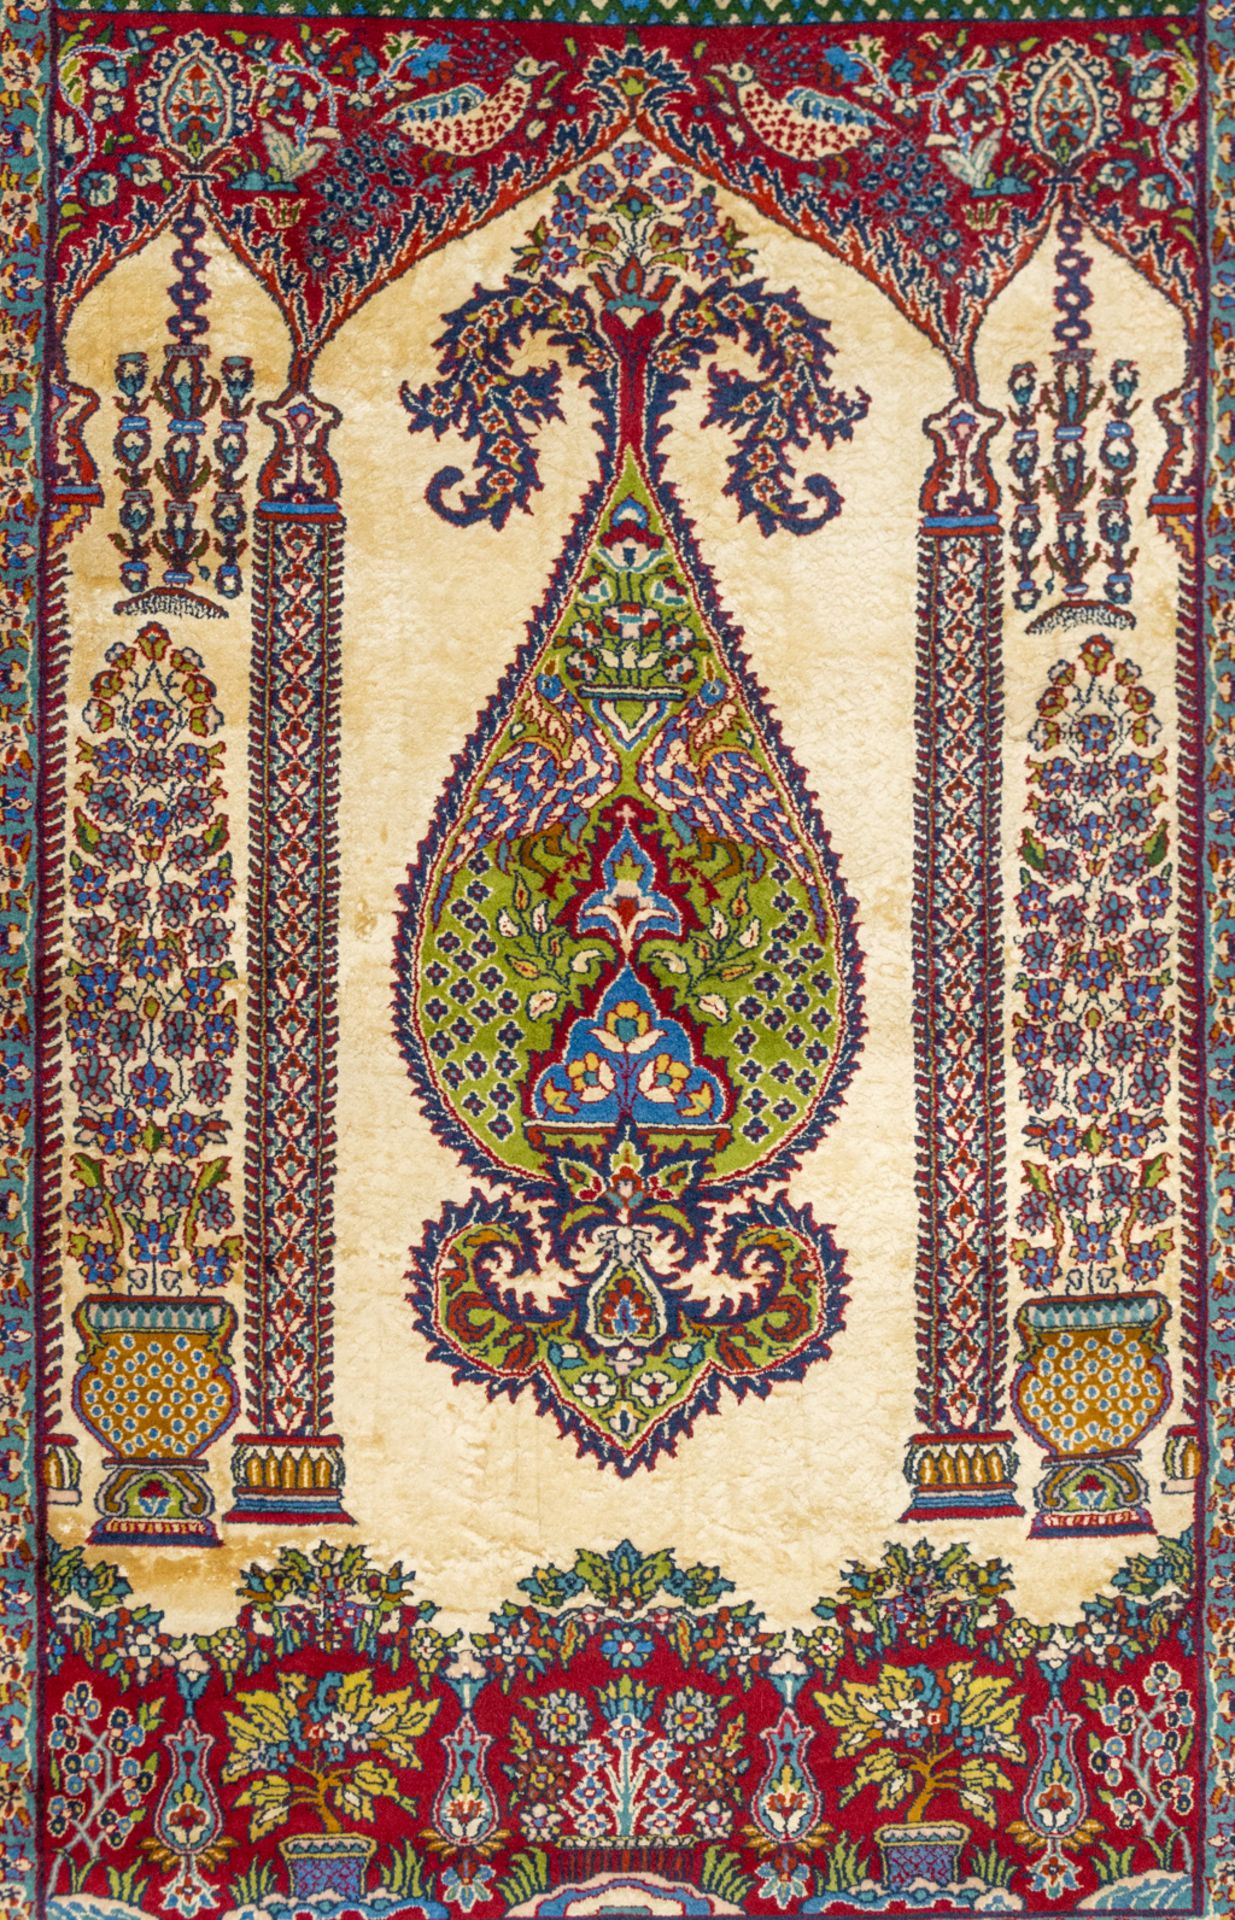 An Oriental hand-made and signed carpet, made of Cashemir. Combination of wool and silk. (185 x 123 - Image 9 of 9